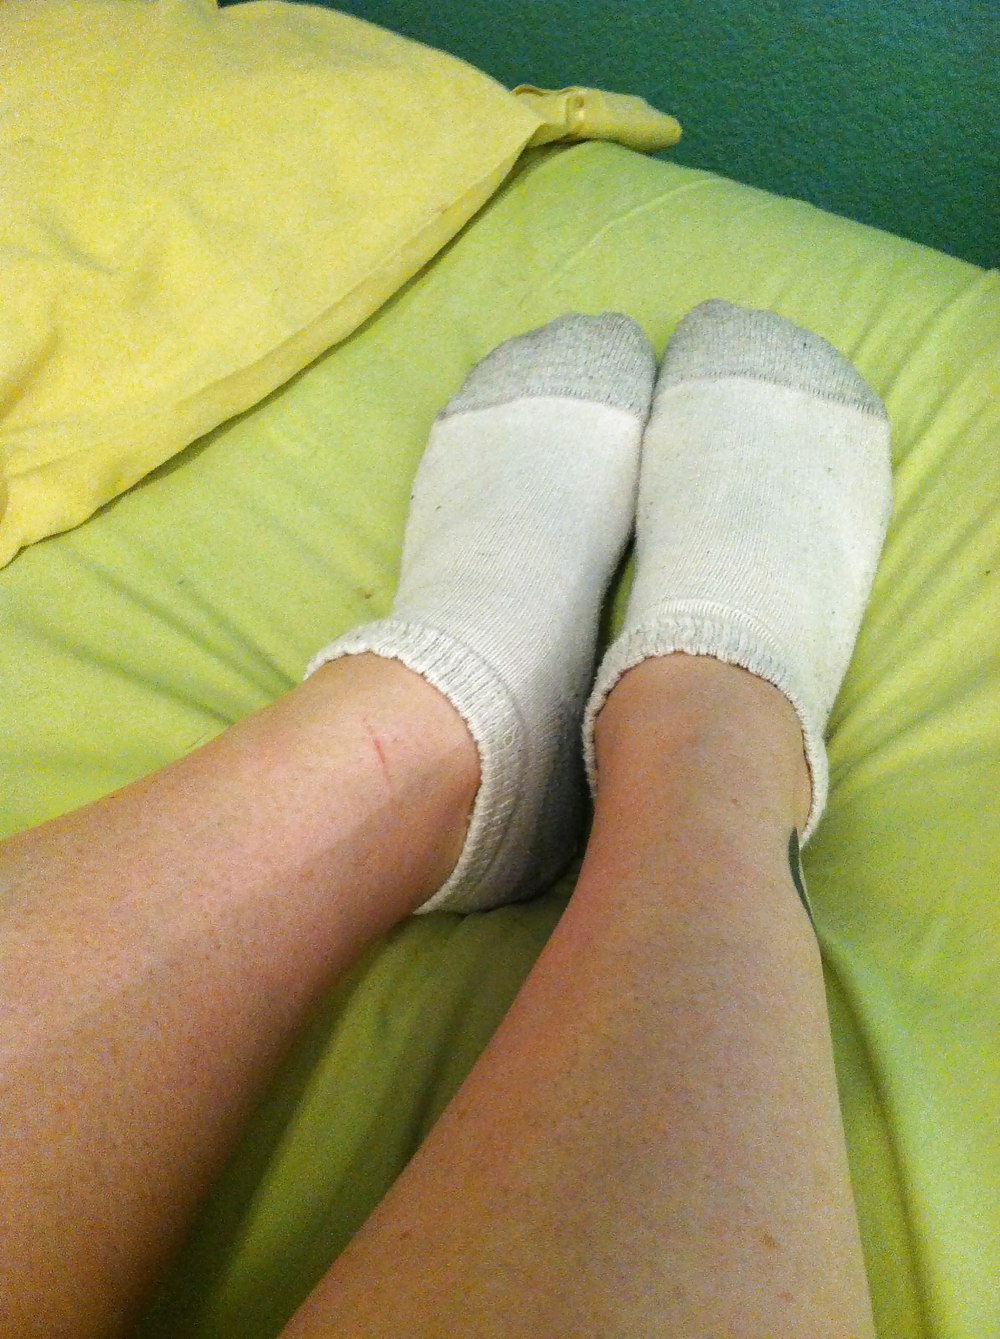 friend Britt with stinky socks porn pictures